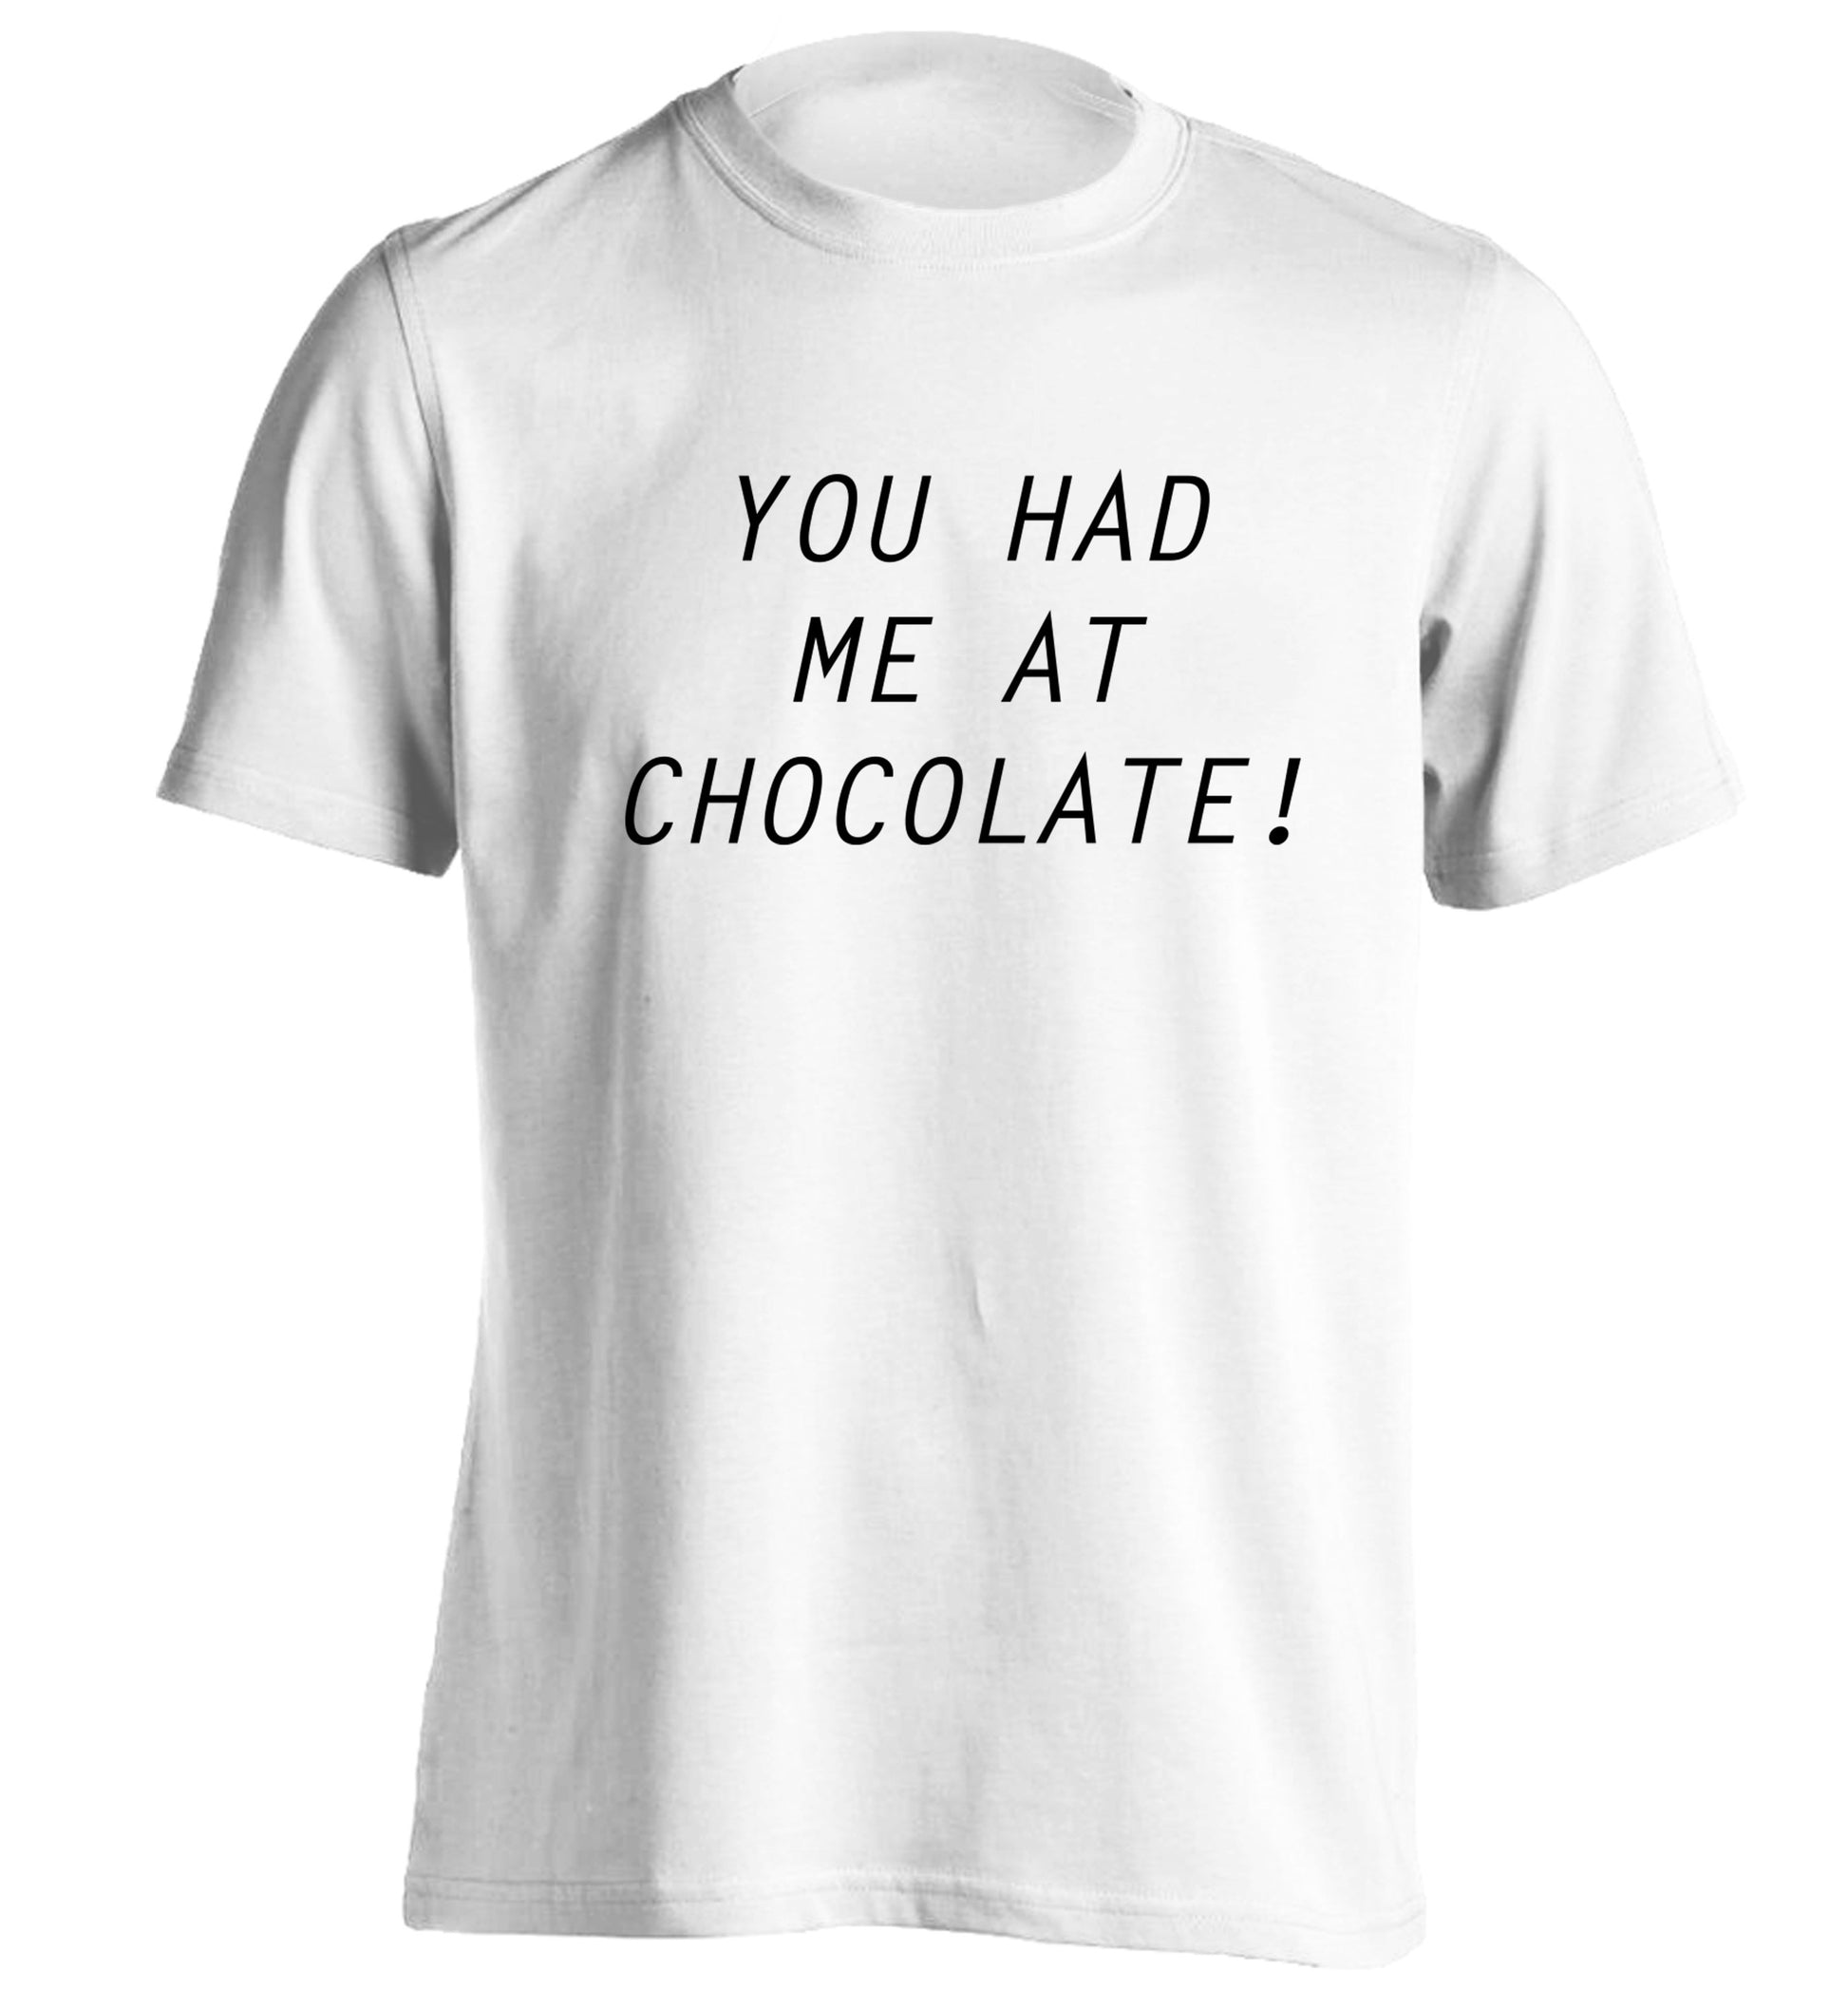 You had me at chocolate adults unisex white Tshirt 2XL